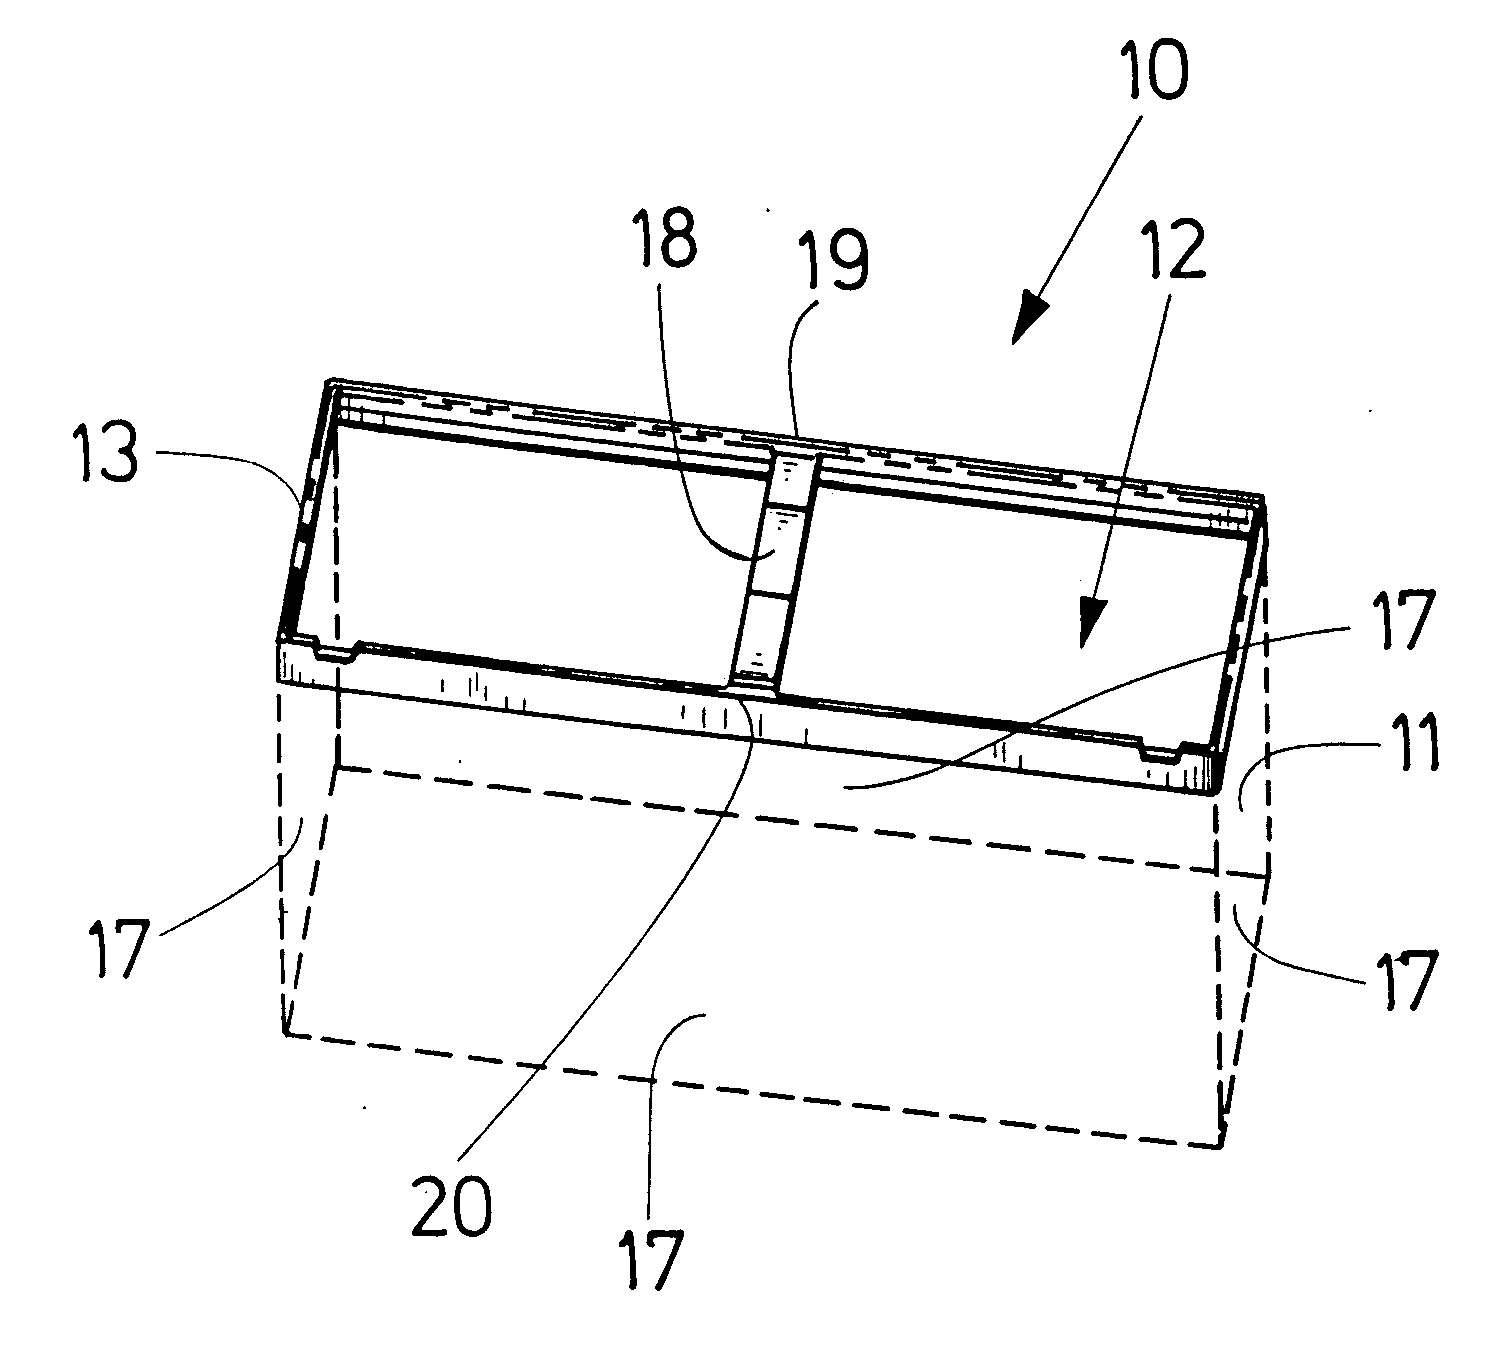 Frame element for placement onto an aquarium container